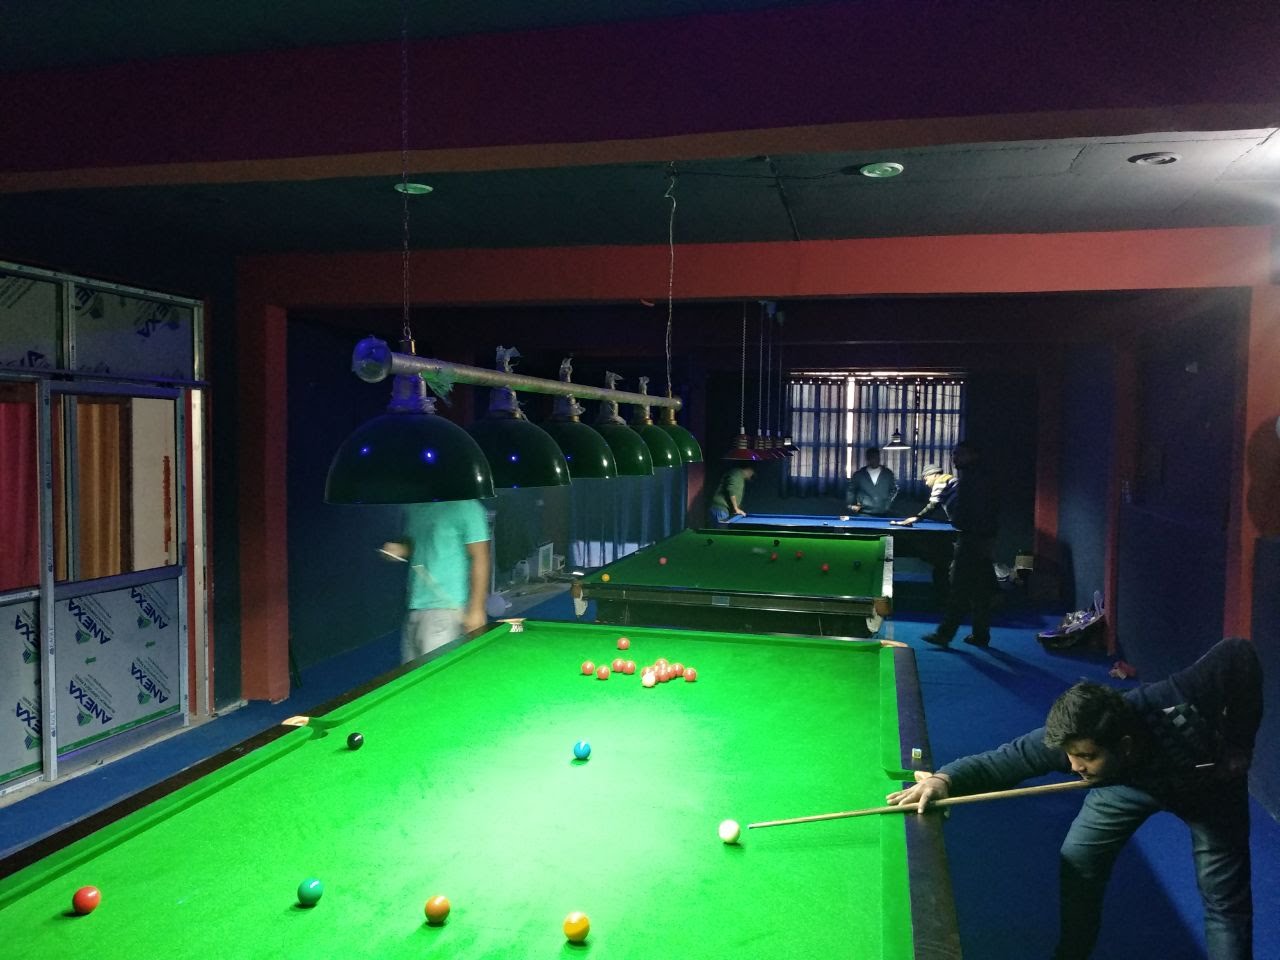 Where can I find some venues to play pool and snooker in Delhi